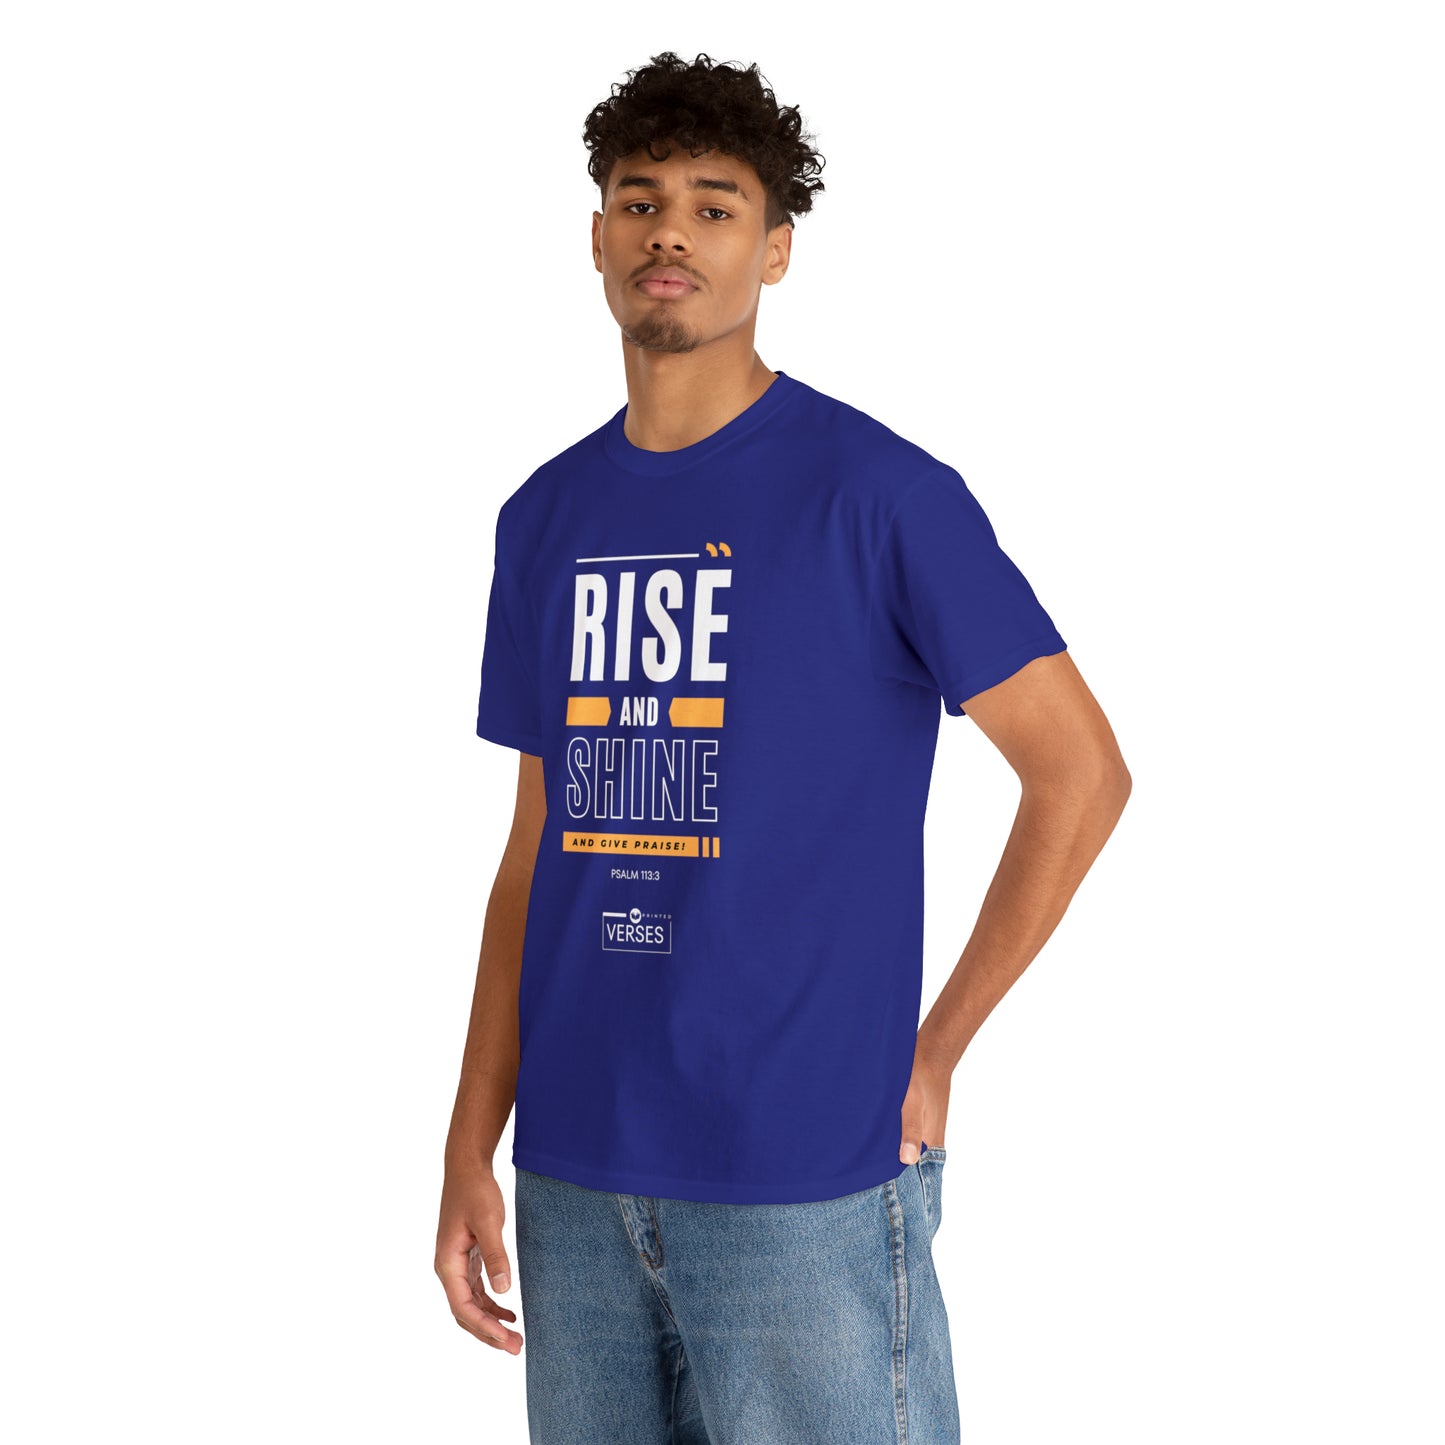 RISE AND SHINE AND GIVE PRAISE - DRK TEE